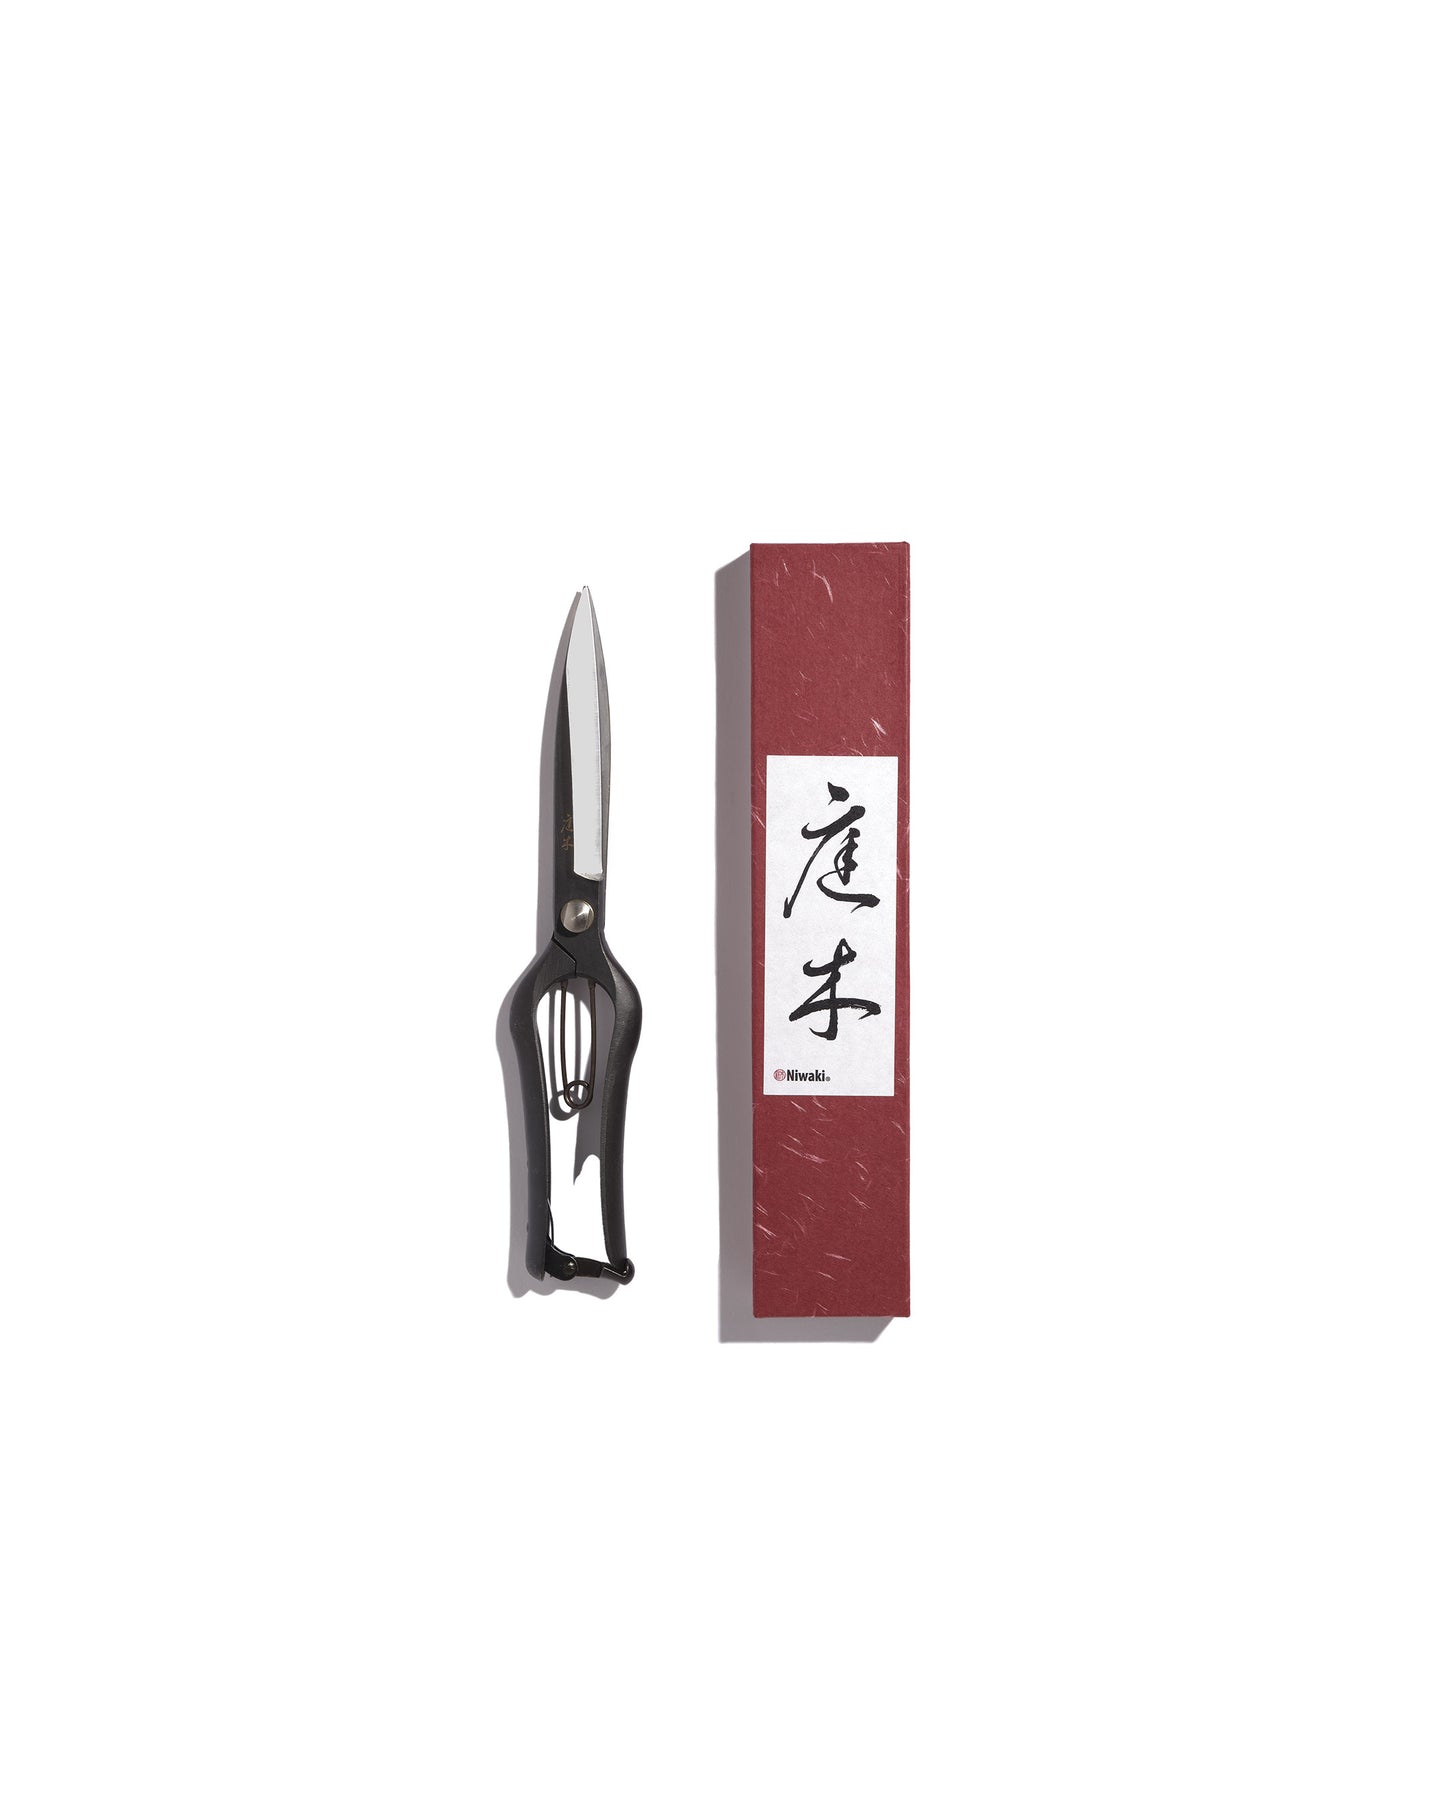 Japanese Forged Steel Topiary Pruning Scissors